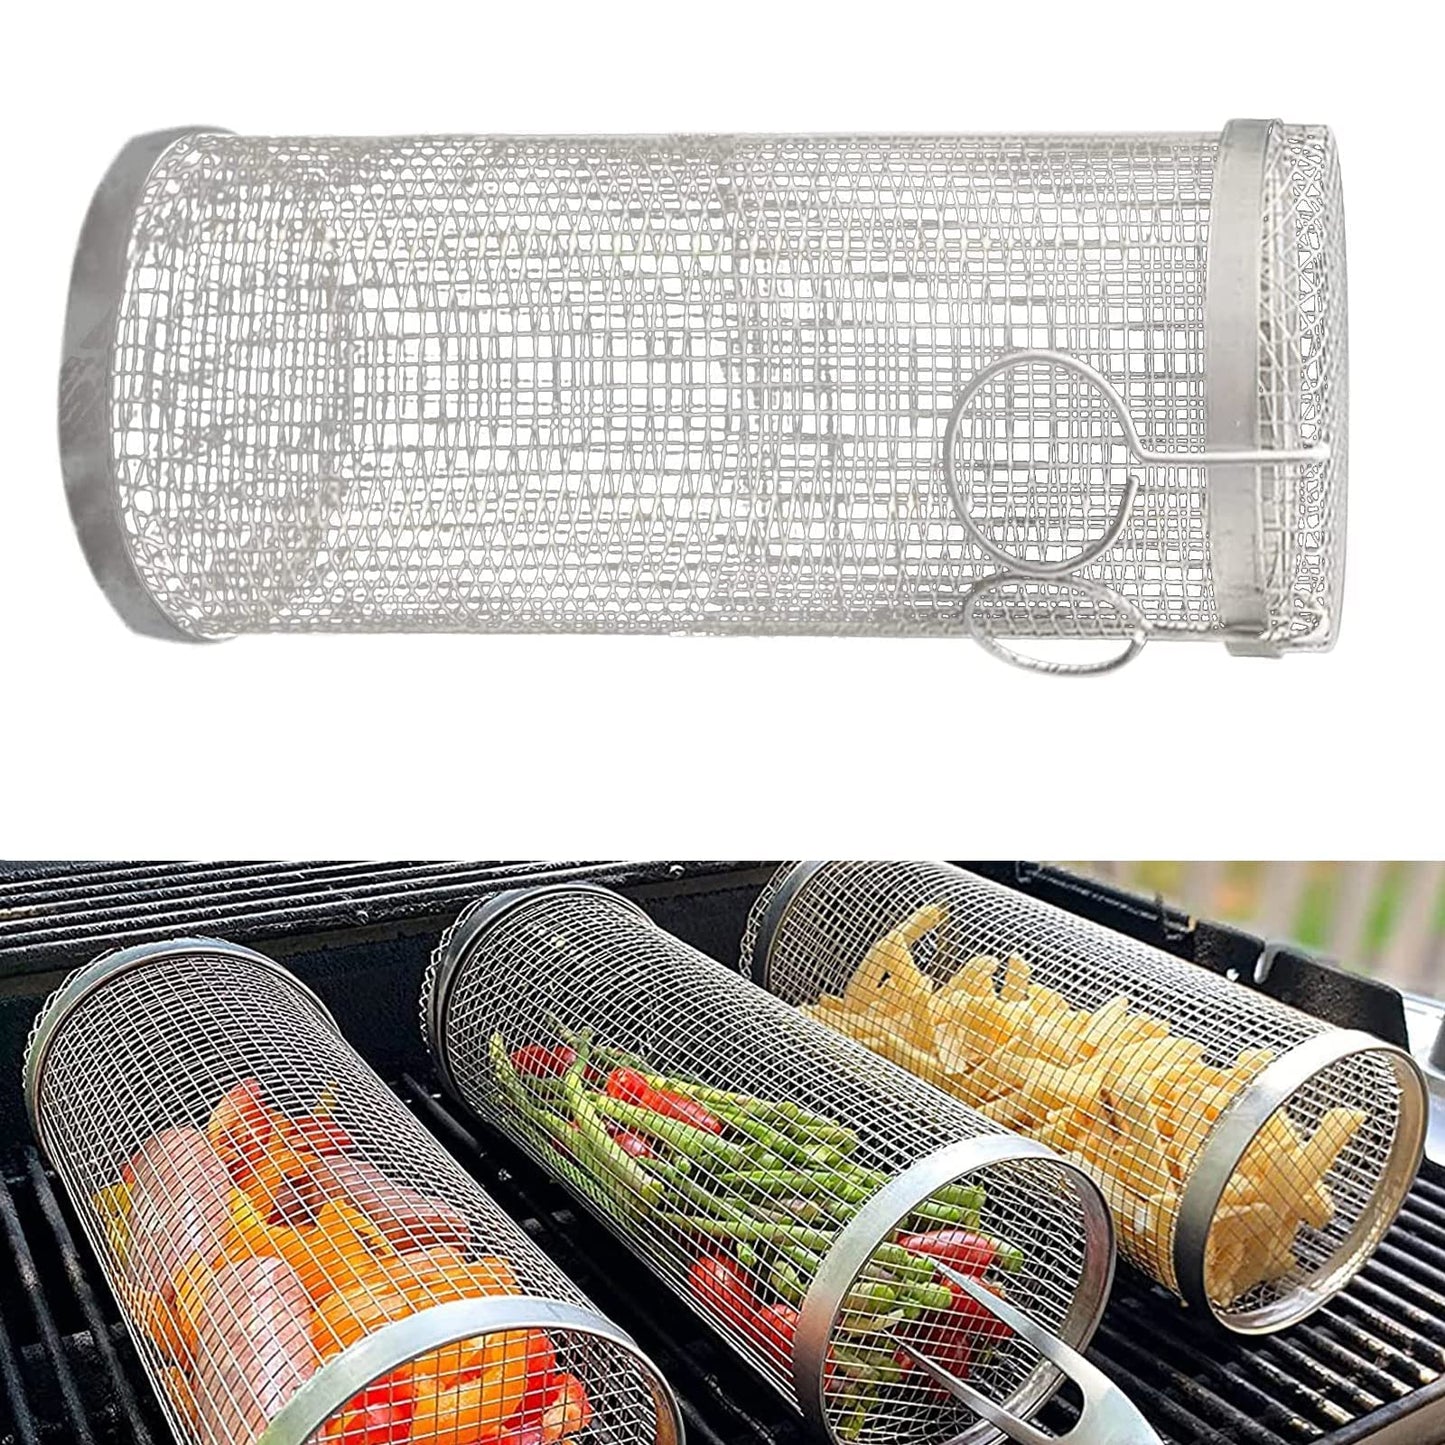 Rolling Grilling Basket Metal BBQ Barbecue Basket Net Portable Outdoor Camping Barbecue Rack Kitchen Gadgets - Homreo